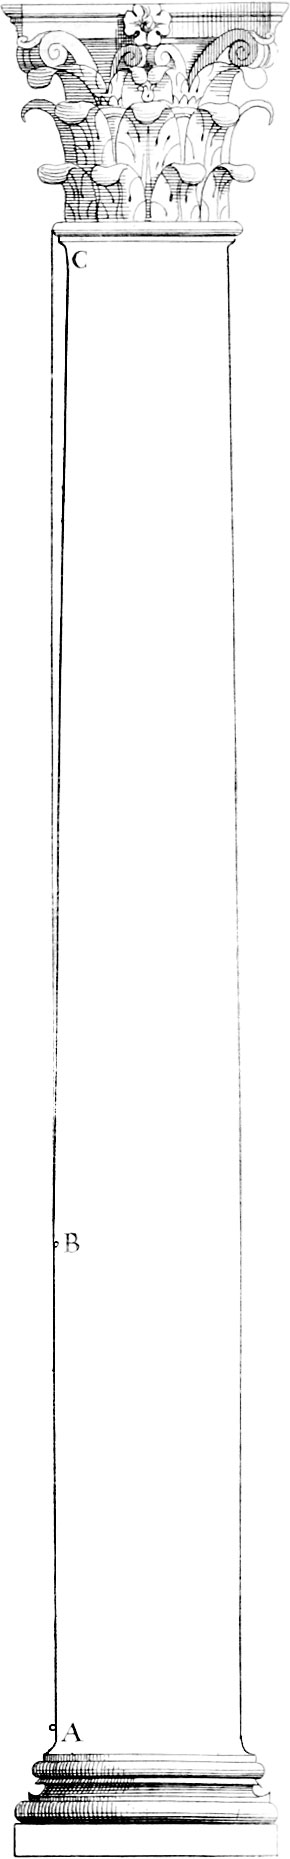 Diagram of a column with swelling and diminution